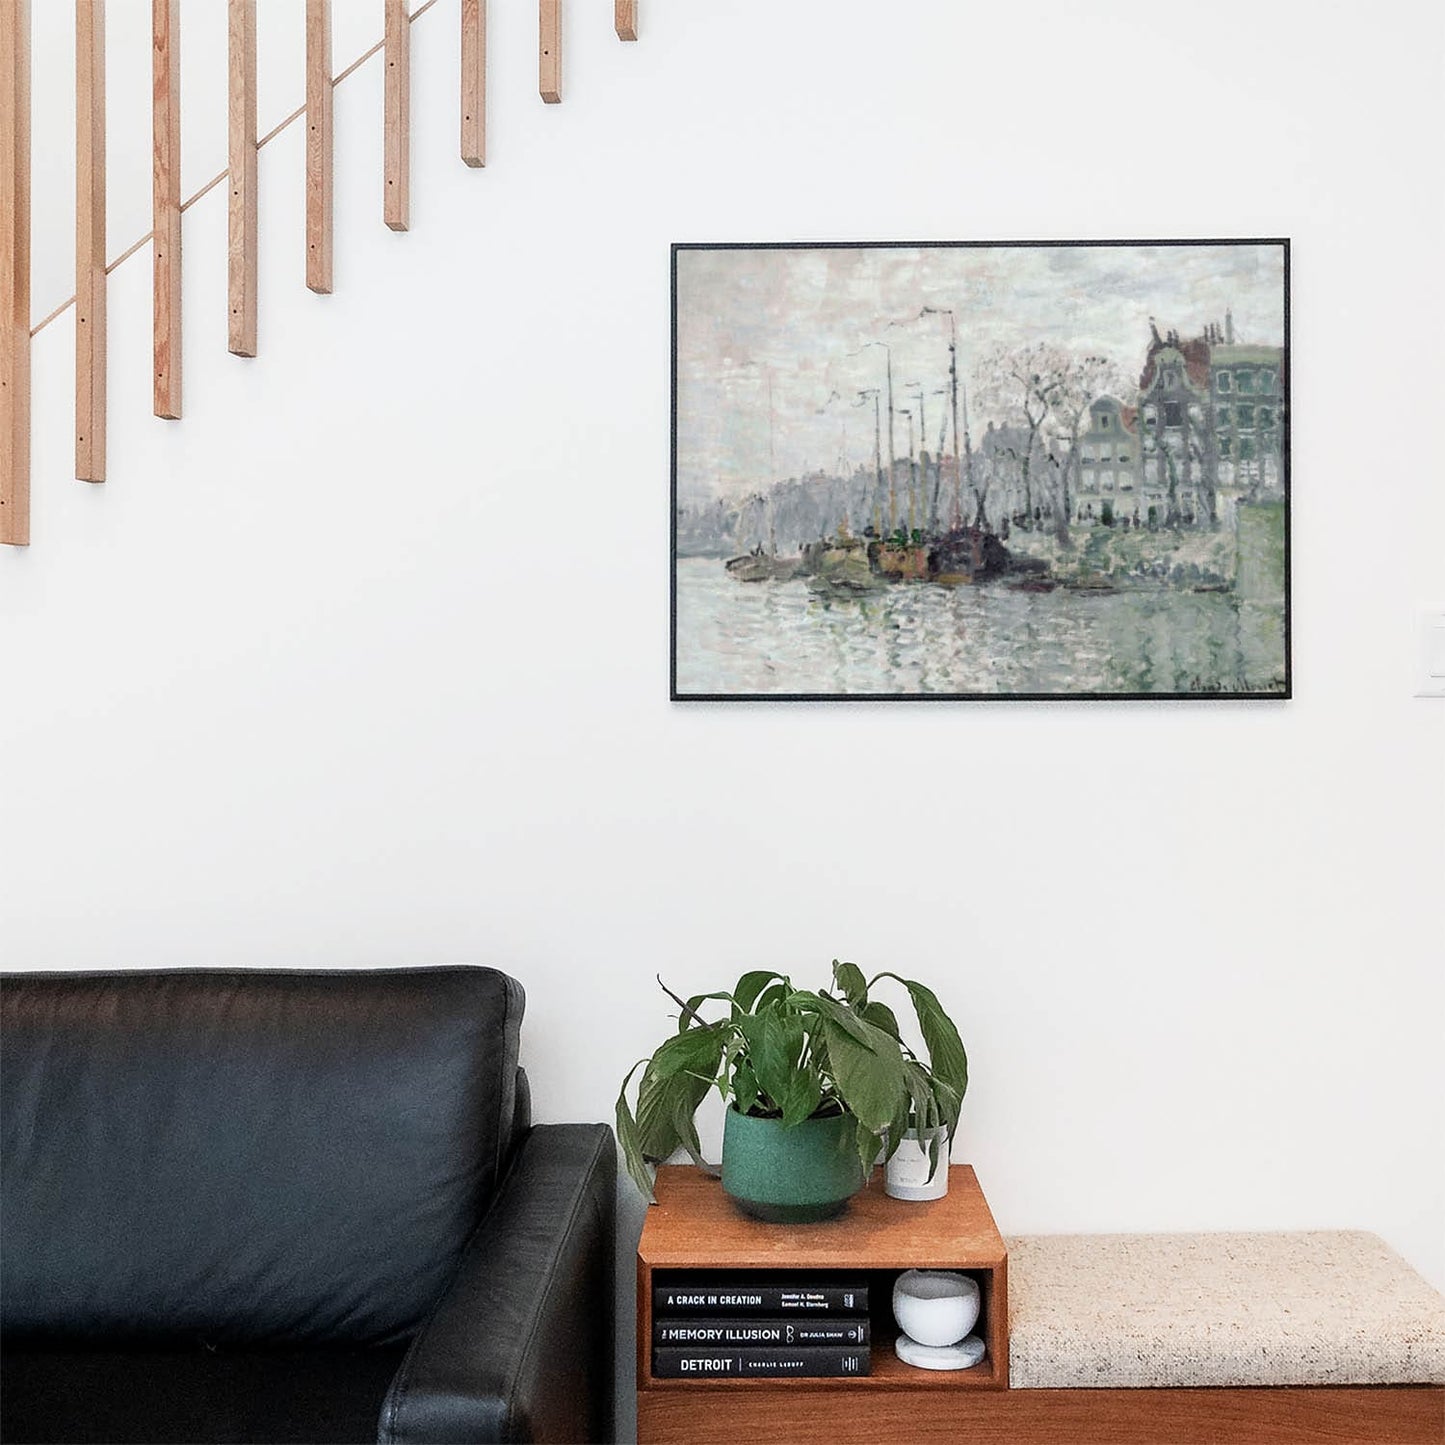 Living space with a black leather couch and table with a plant and books below a staircase featuring a framed picture of Seascape and City